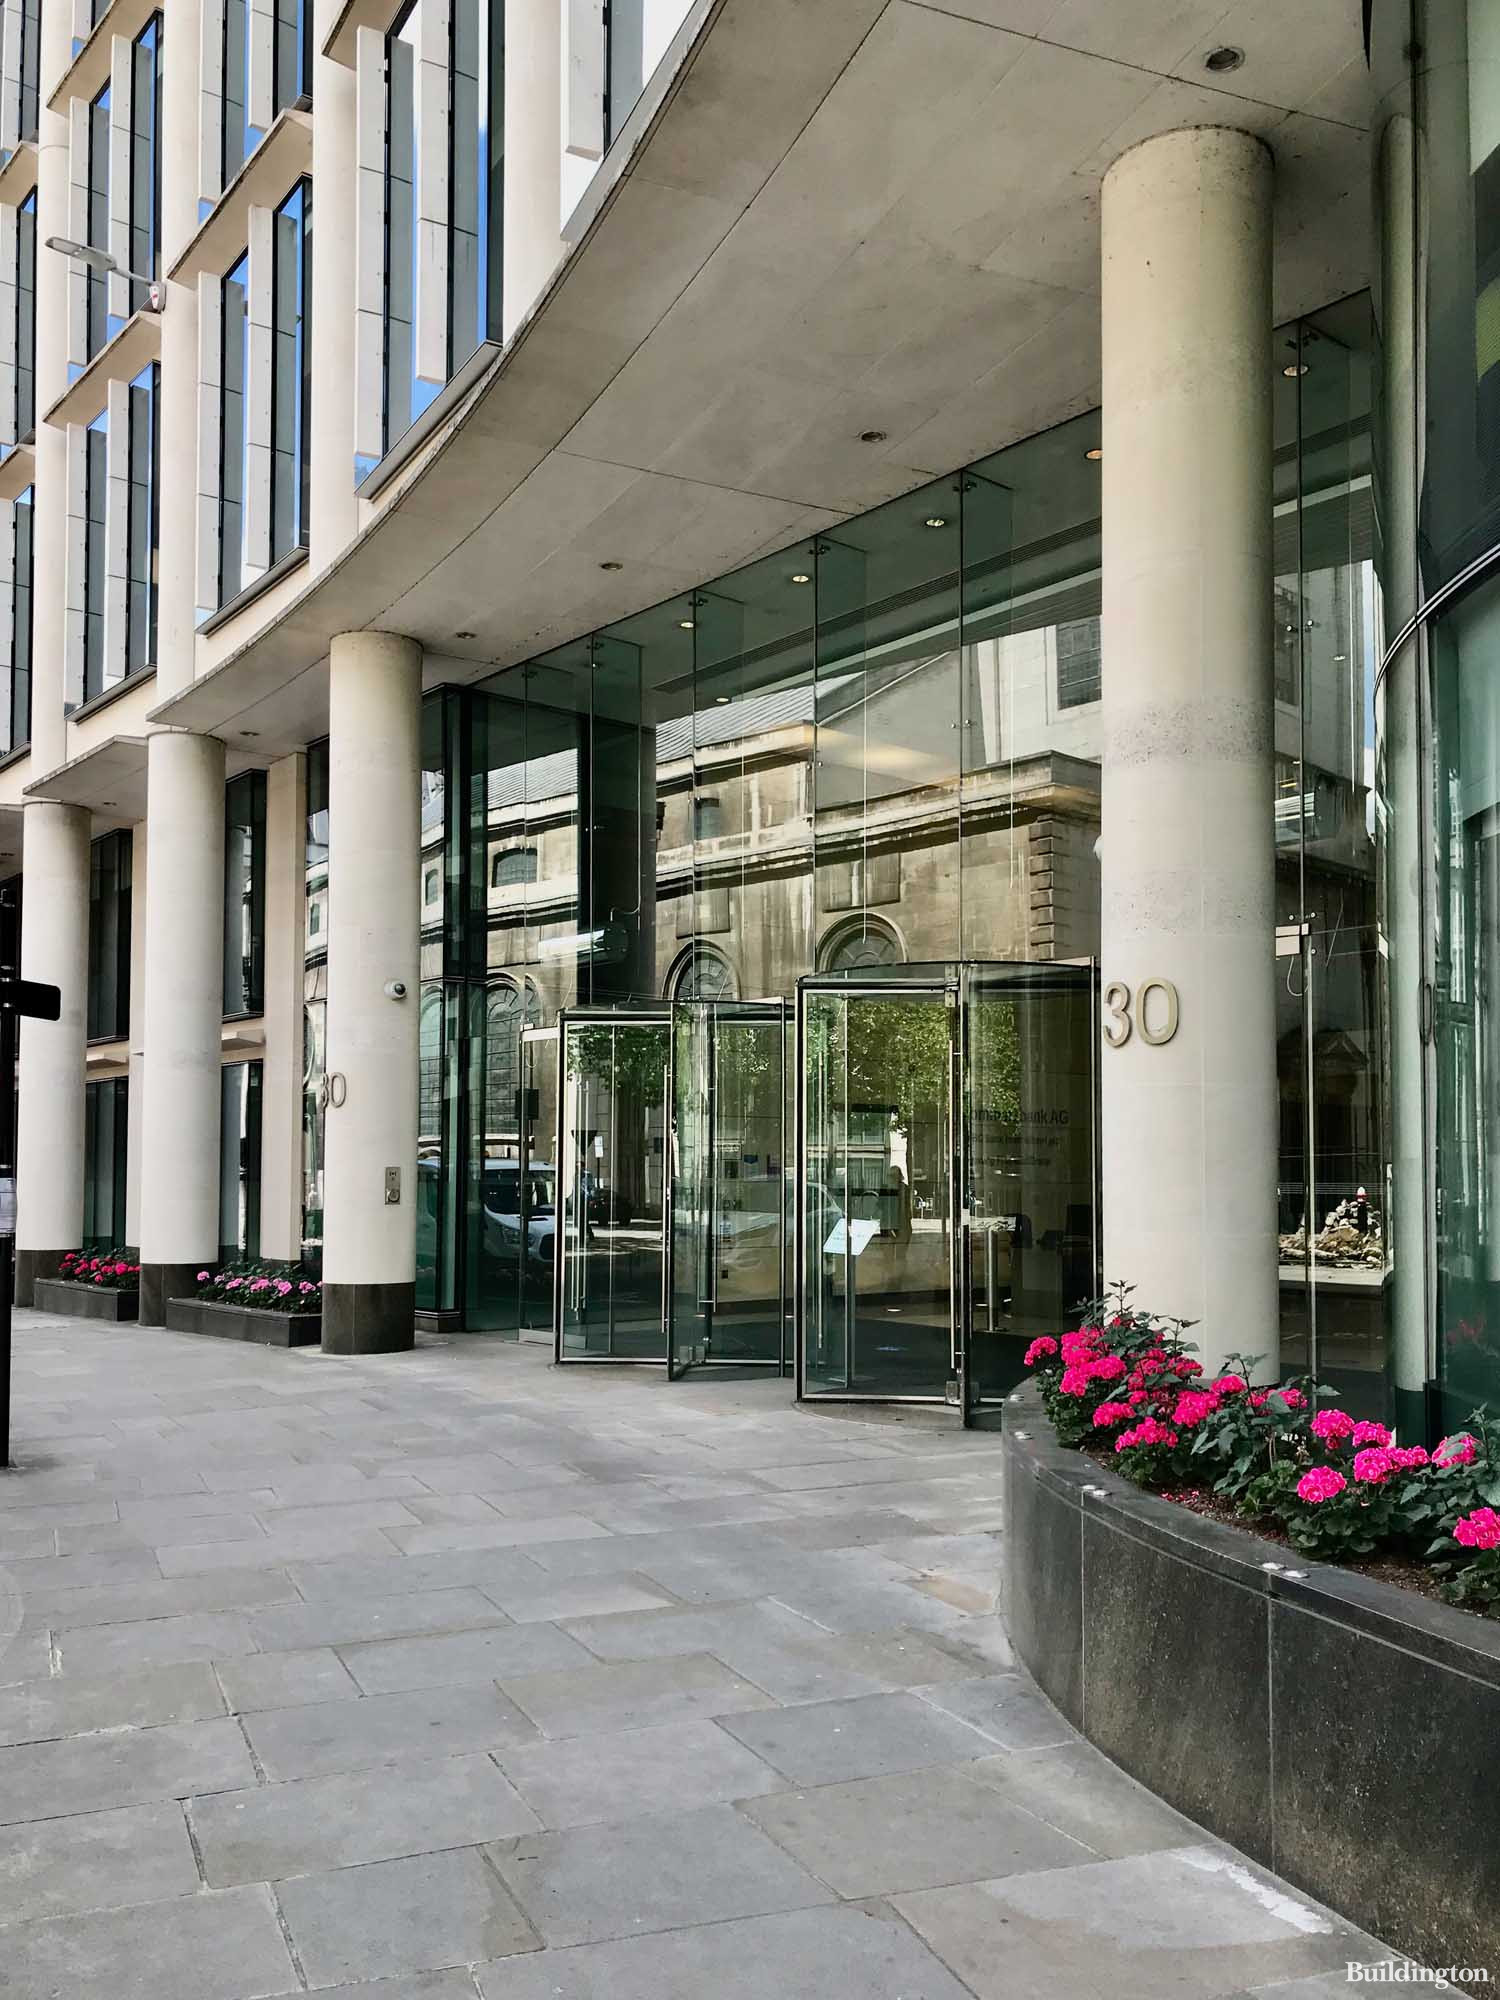 Entrance to 30 Gresham Street office building in the City of London EC2.